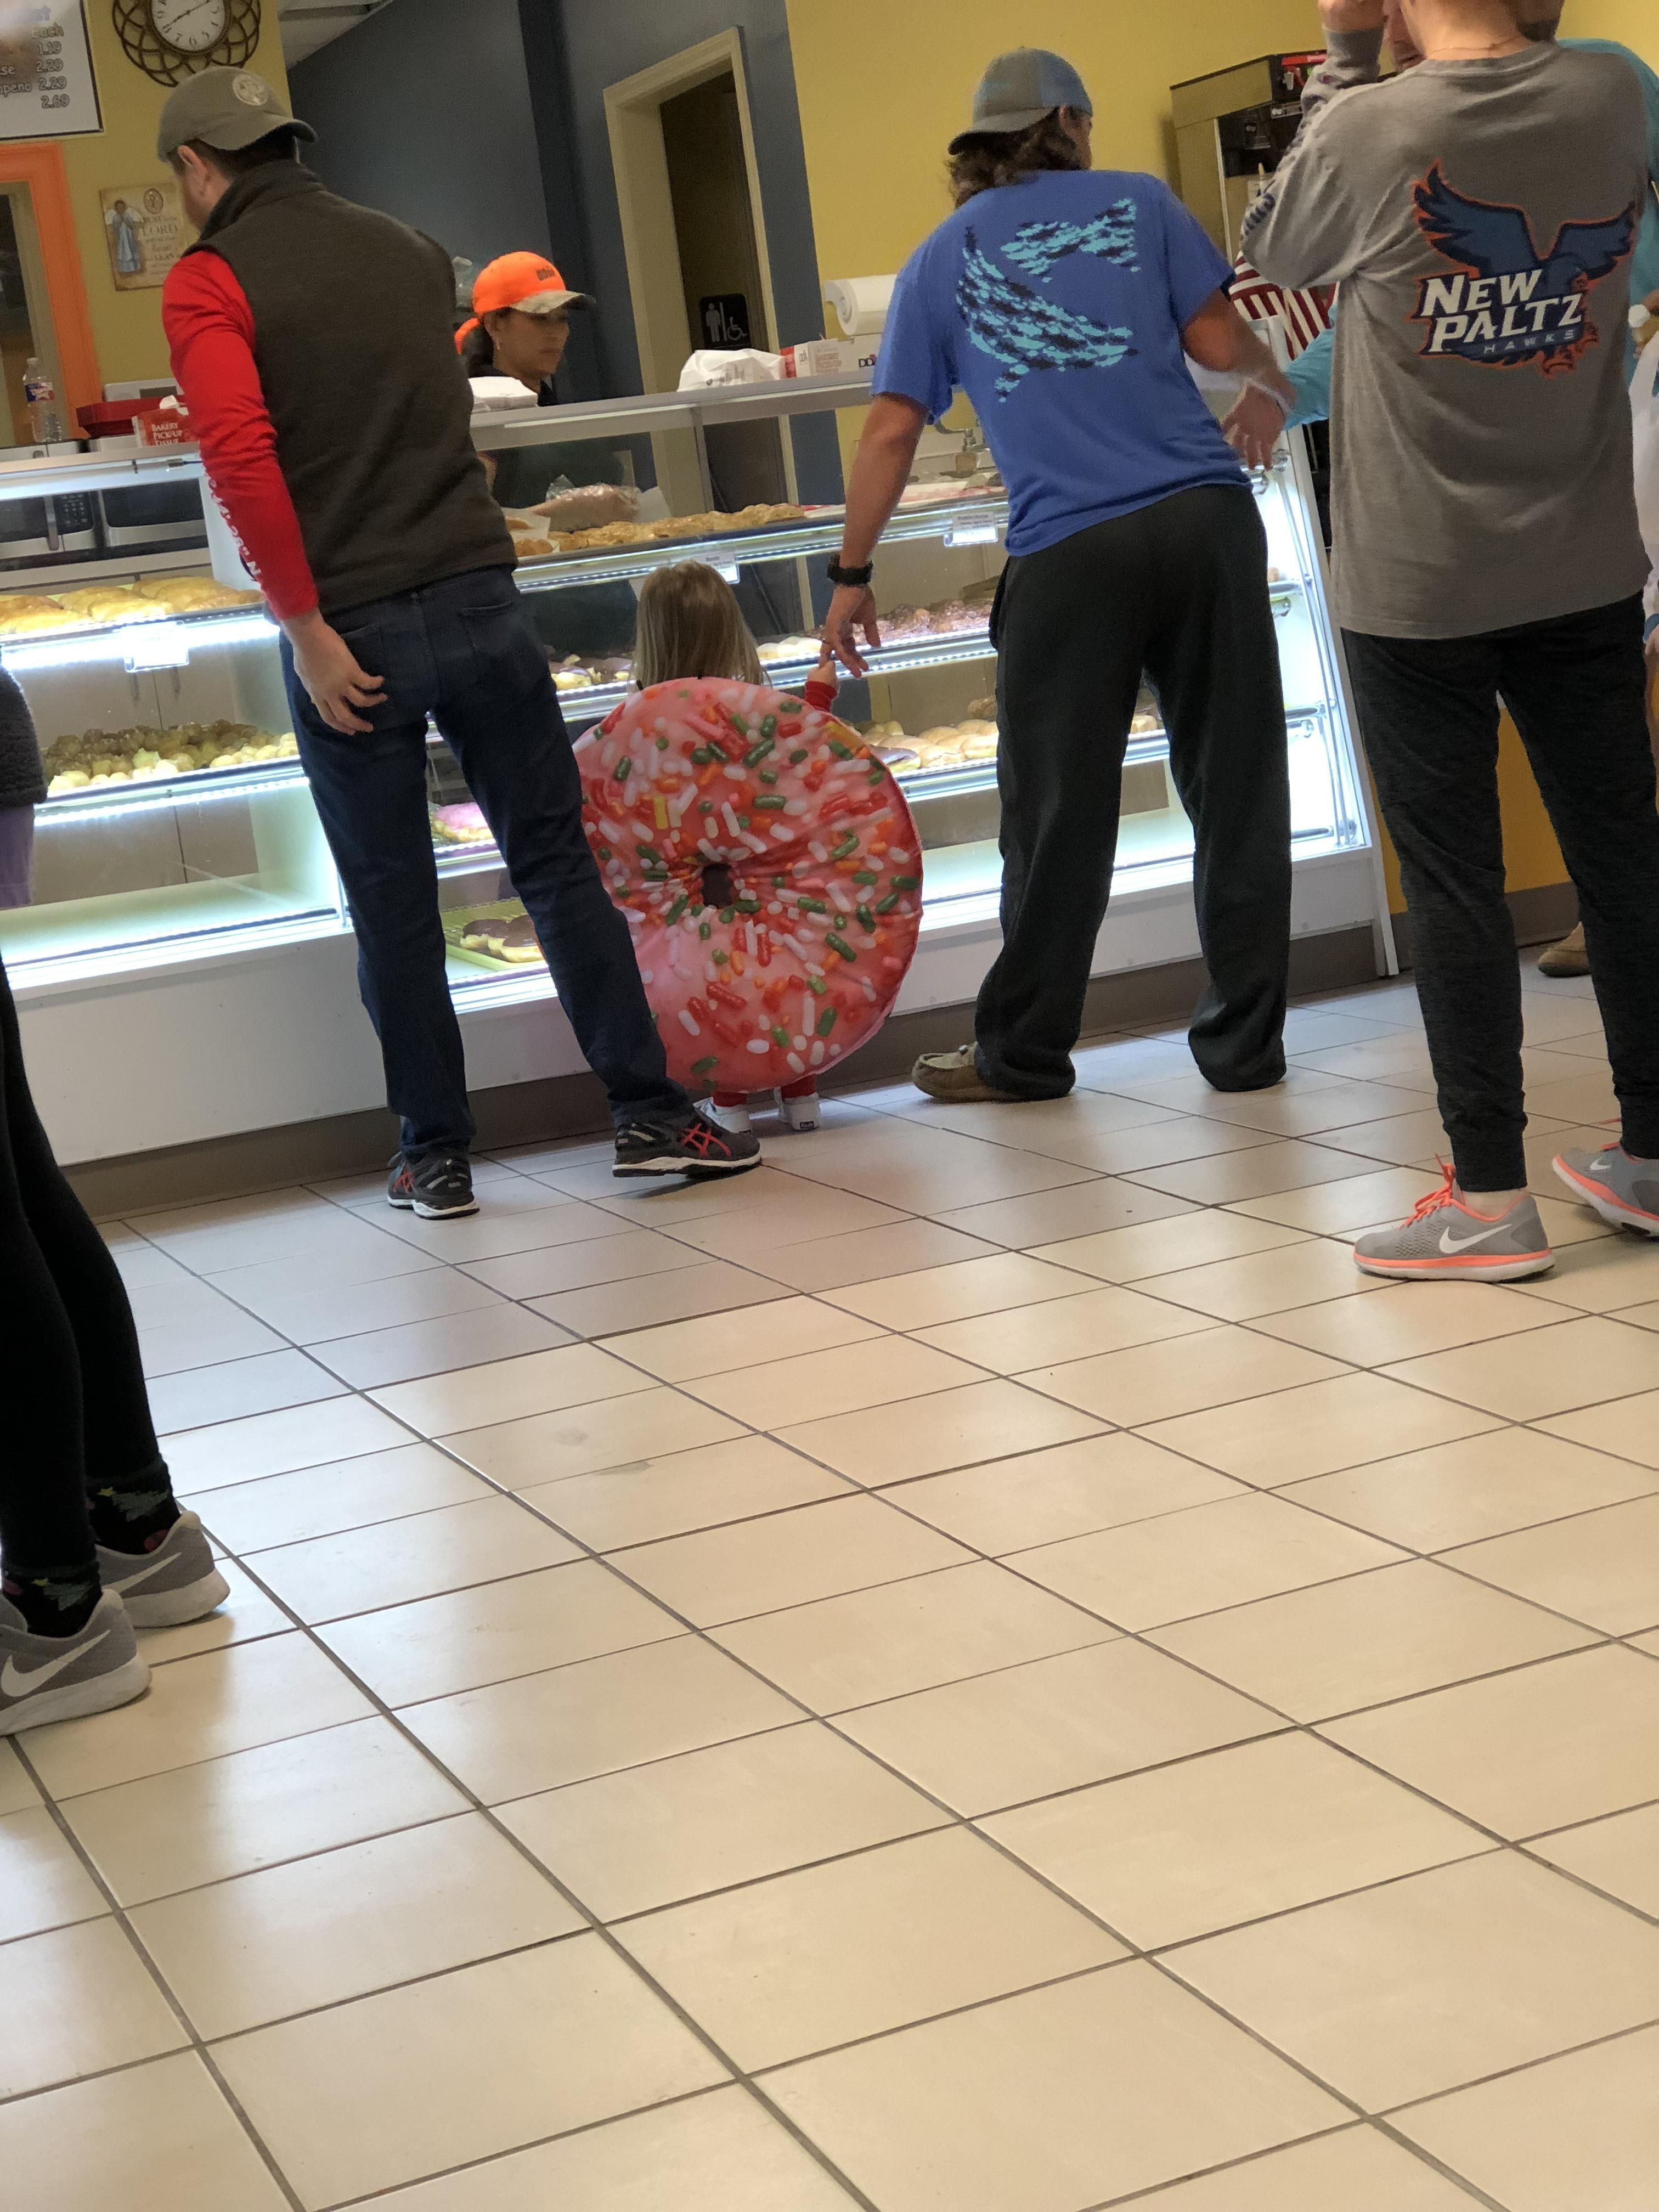 Not all hero’s wear capes.. some wear donuts to the donut shop. Same, kid. Same.